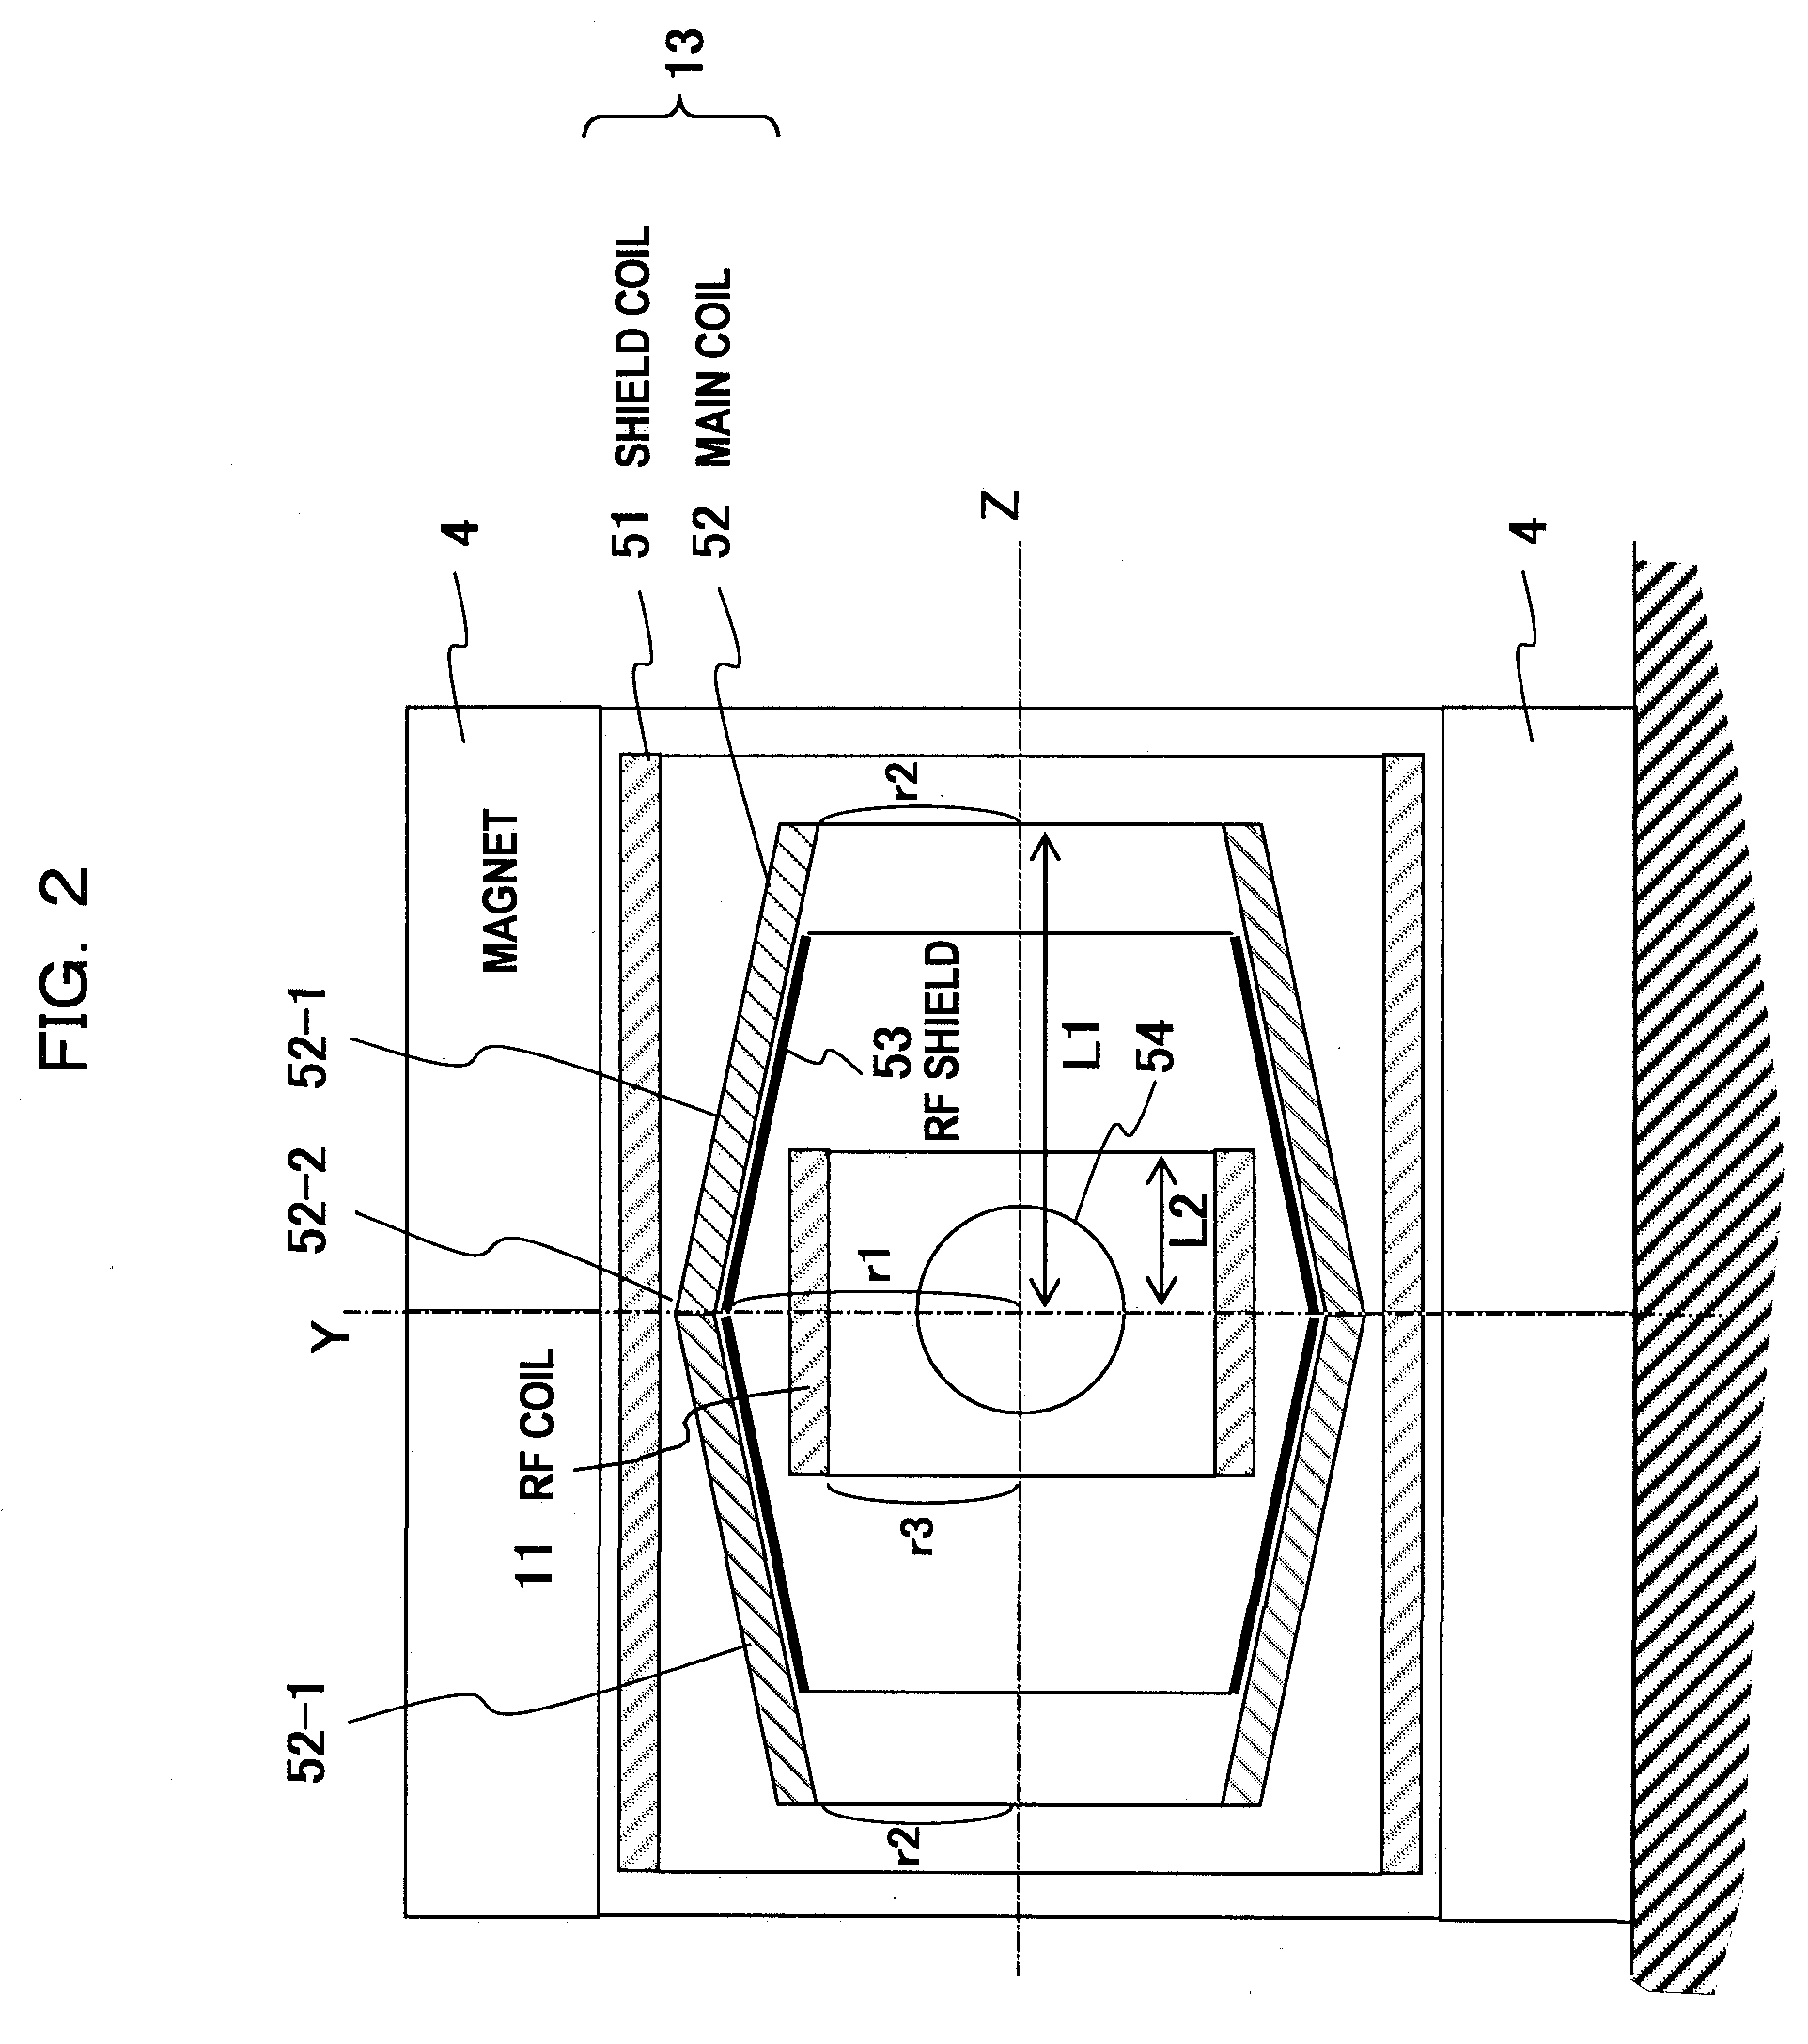 Magnetic resonance imaging apparatus and gradient magnetic field coil